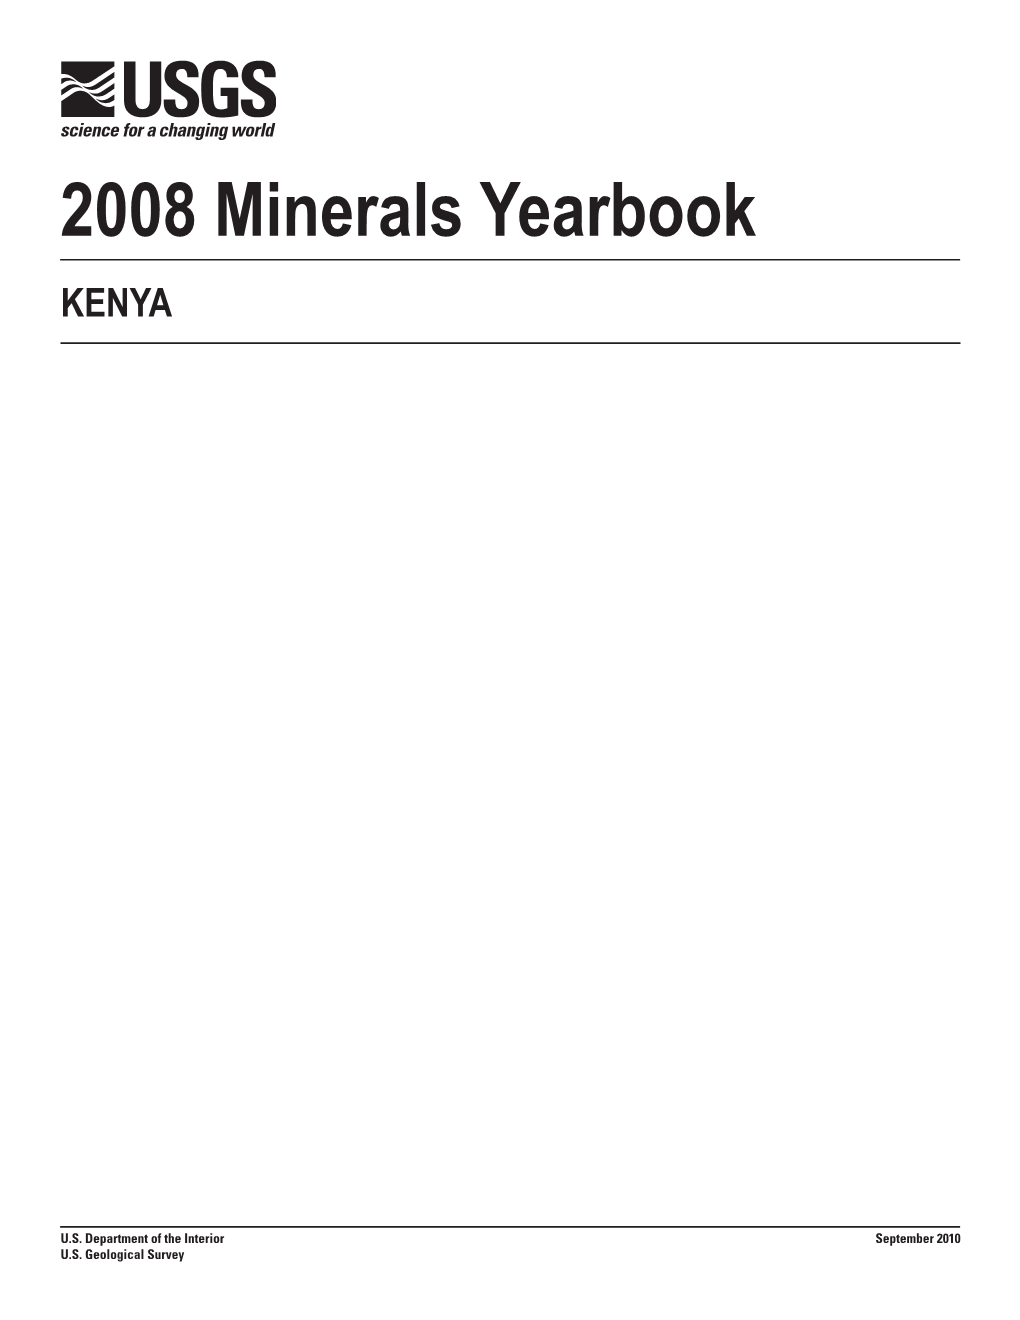 The Mineral Industry of Kenya in 2008